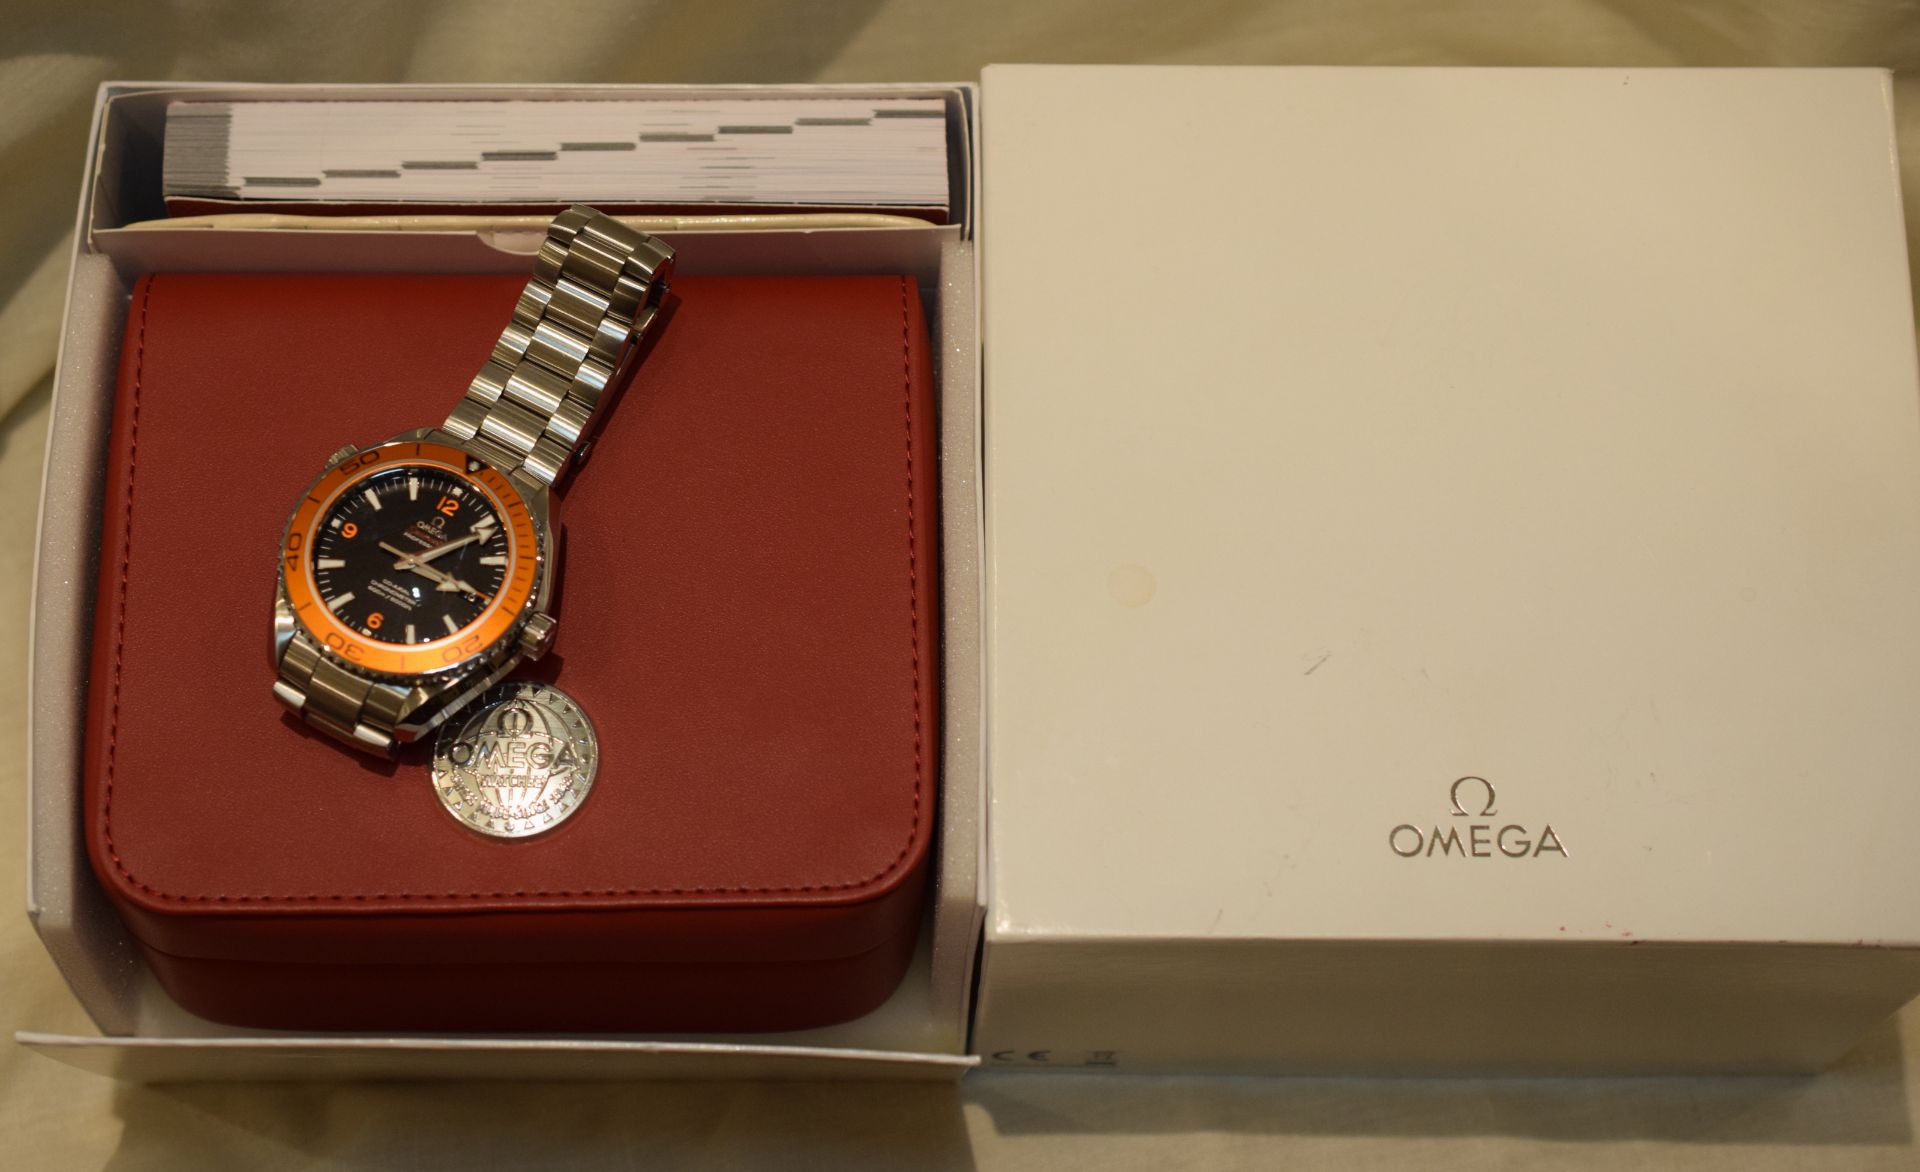 Omega Seamaster Planet Ocean 2014 Only Worn A Few Times - Image 9 of 9